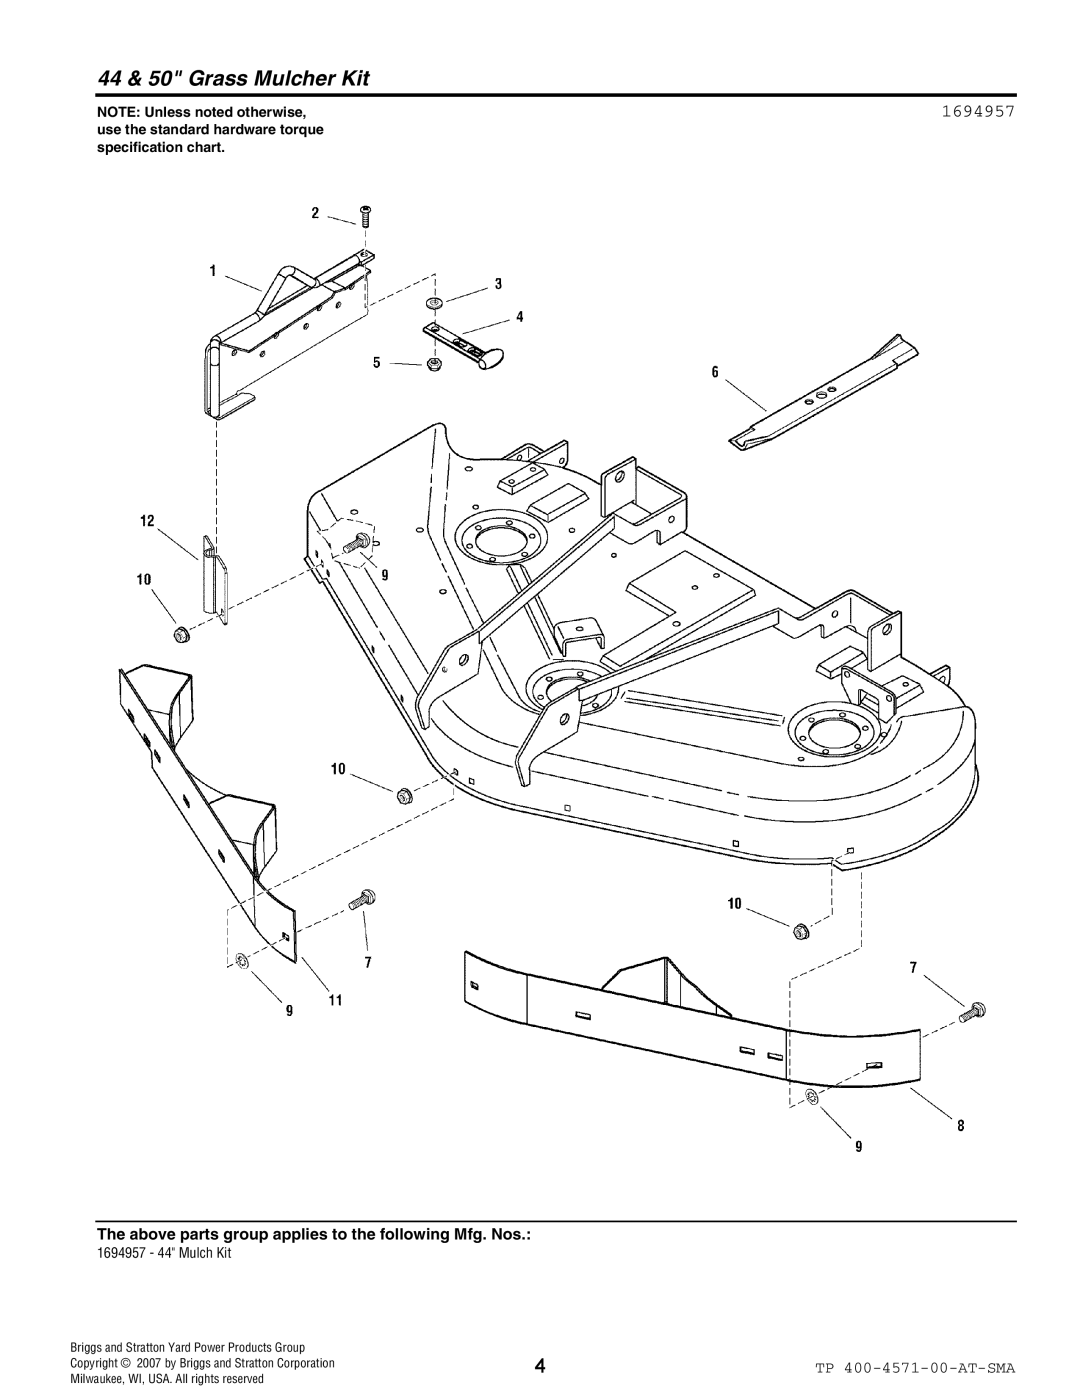 Simplicity 1694957 44 & 50 Grass Mulcher Kit, NOTE Unless noted otherwise, Briggs and Stratton Yard Power Products Group 